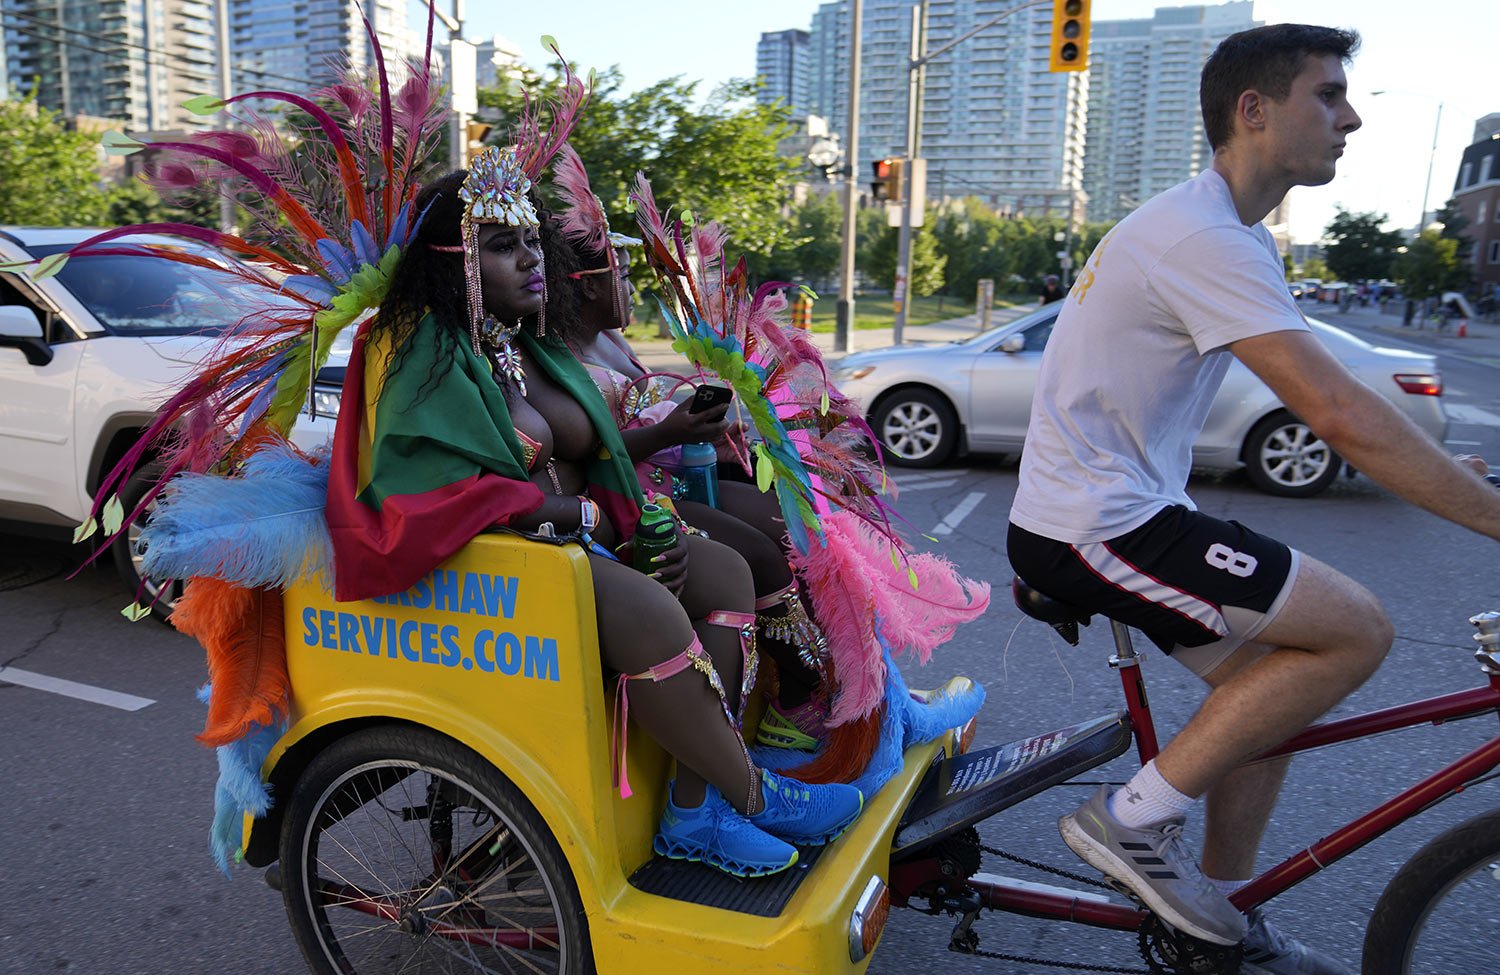  A rickshaw worker pedals costumed clients after they attended the Caribbean Carnival parade in Toronto, Canada, Saturday, July 30, 2022. (AP Photo/Kamran Jebreili) 